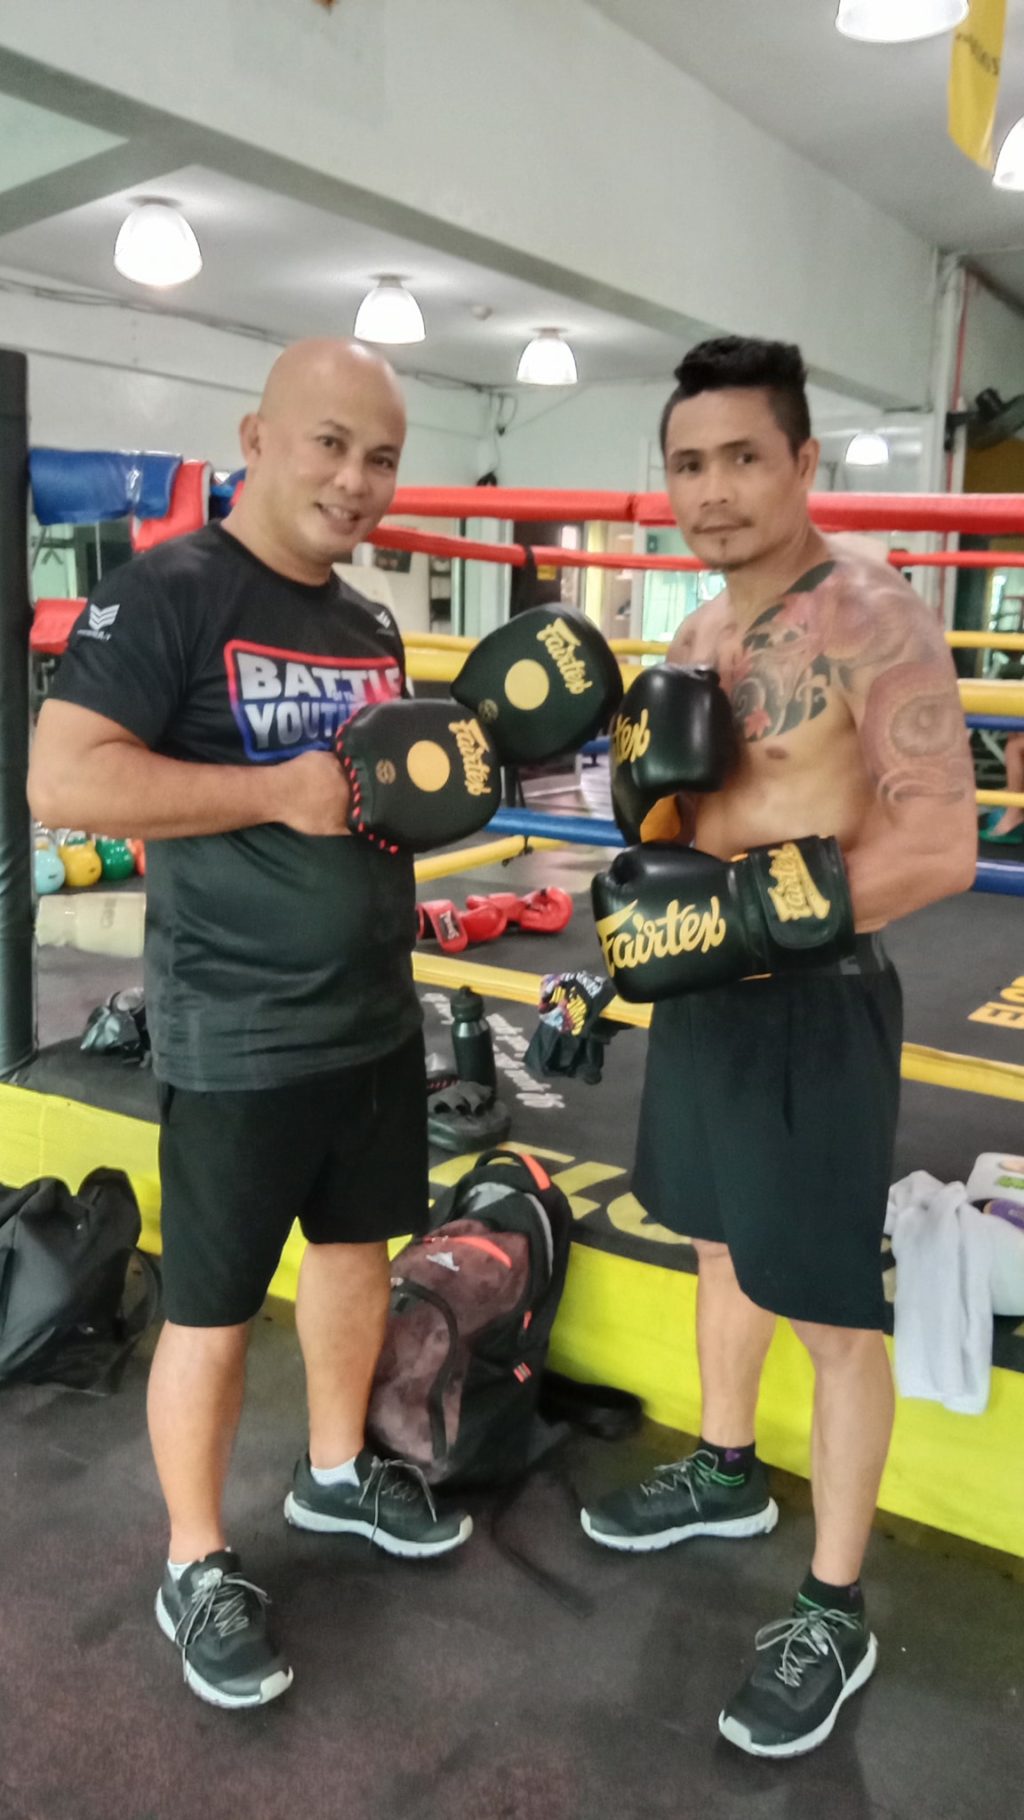 Edmund Villamor (left) and Donnie Nietes (right). | Photo from Villamor's Facebook page